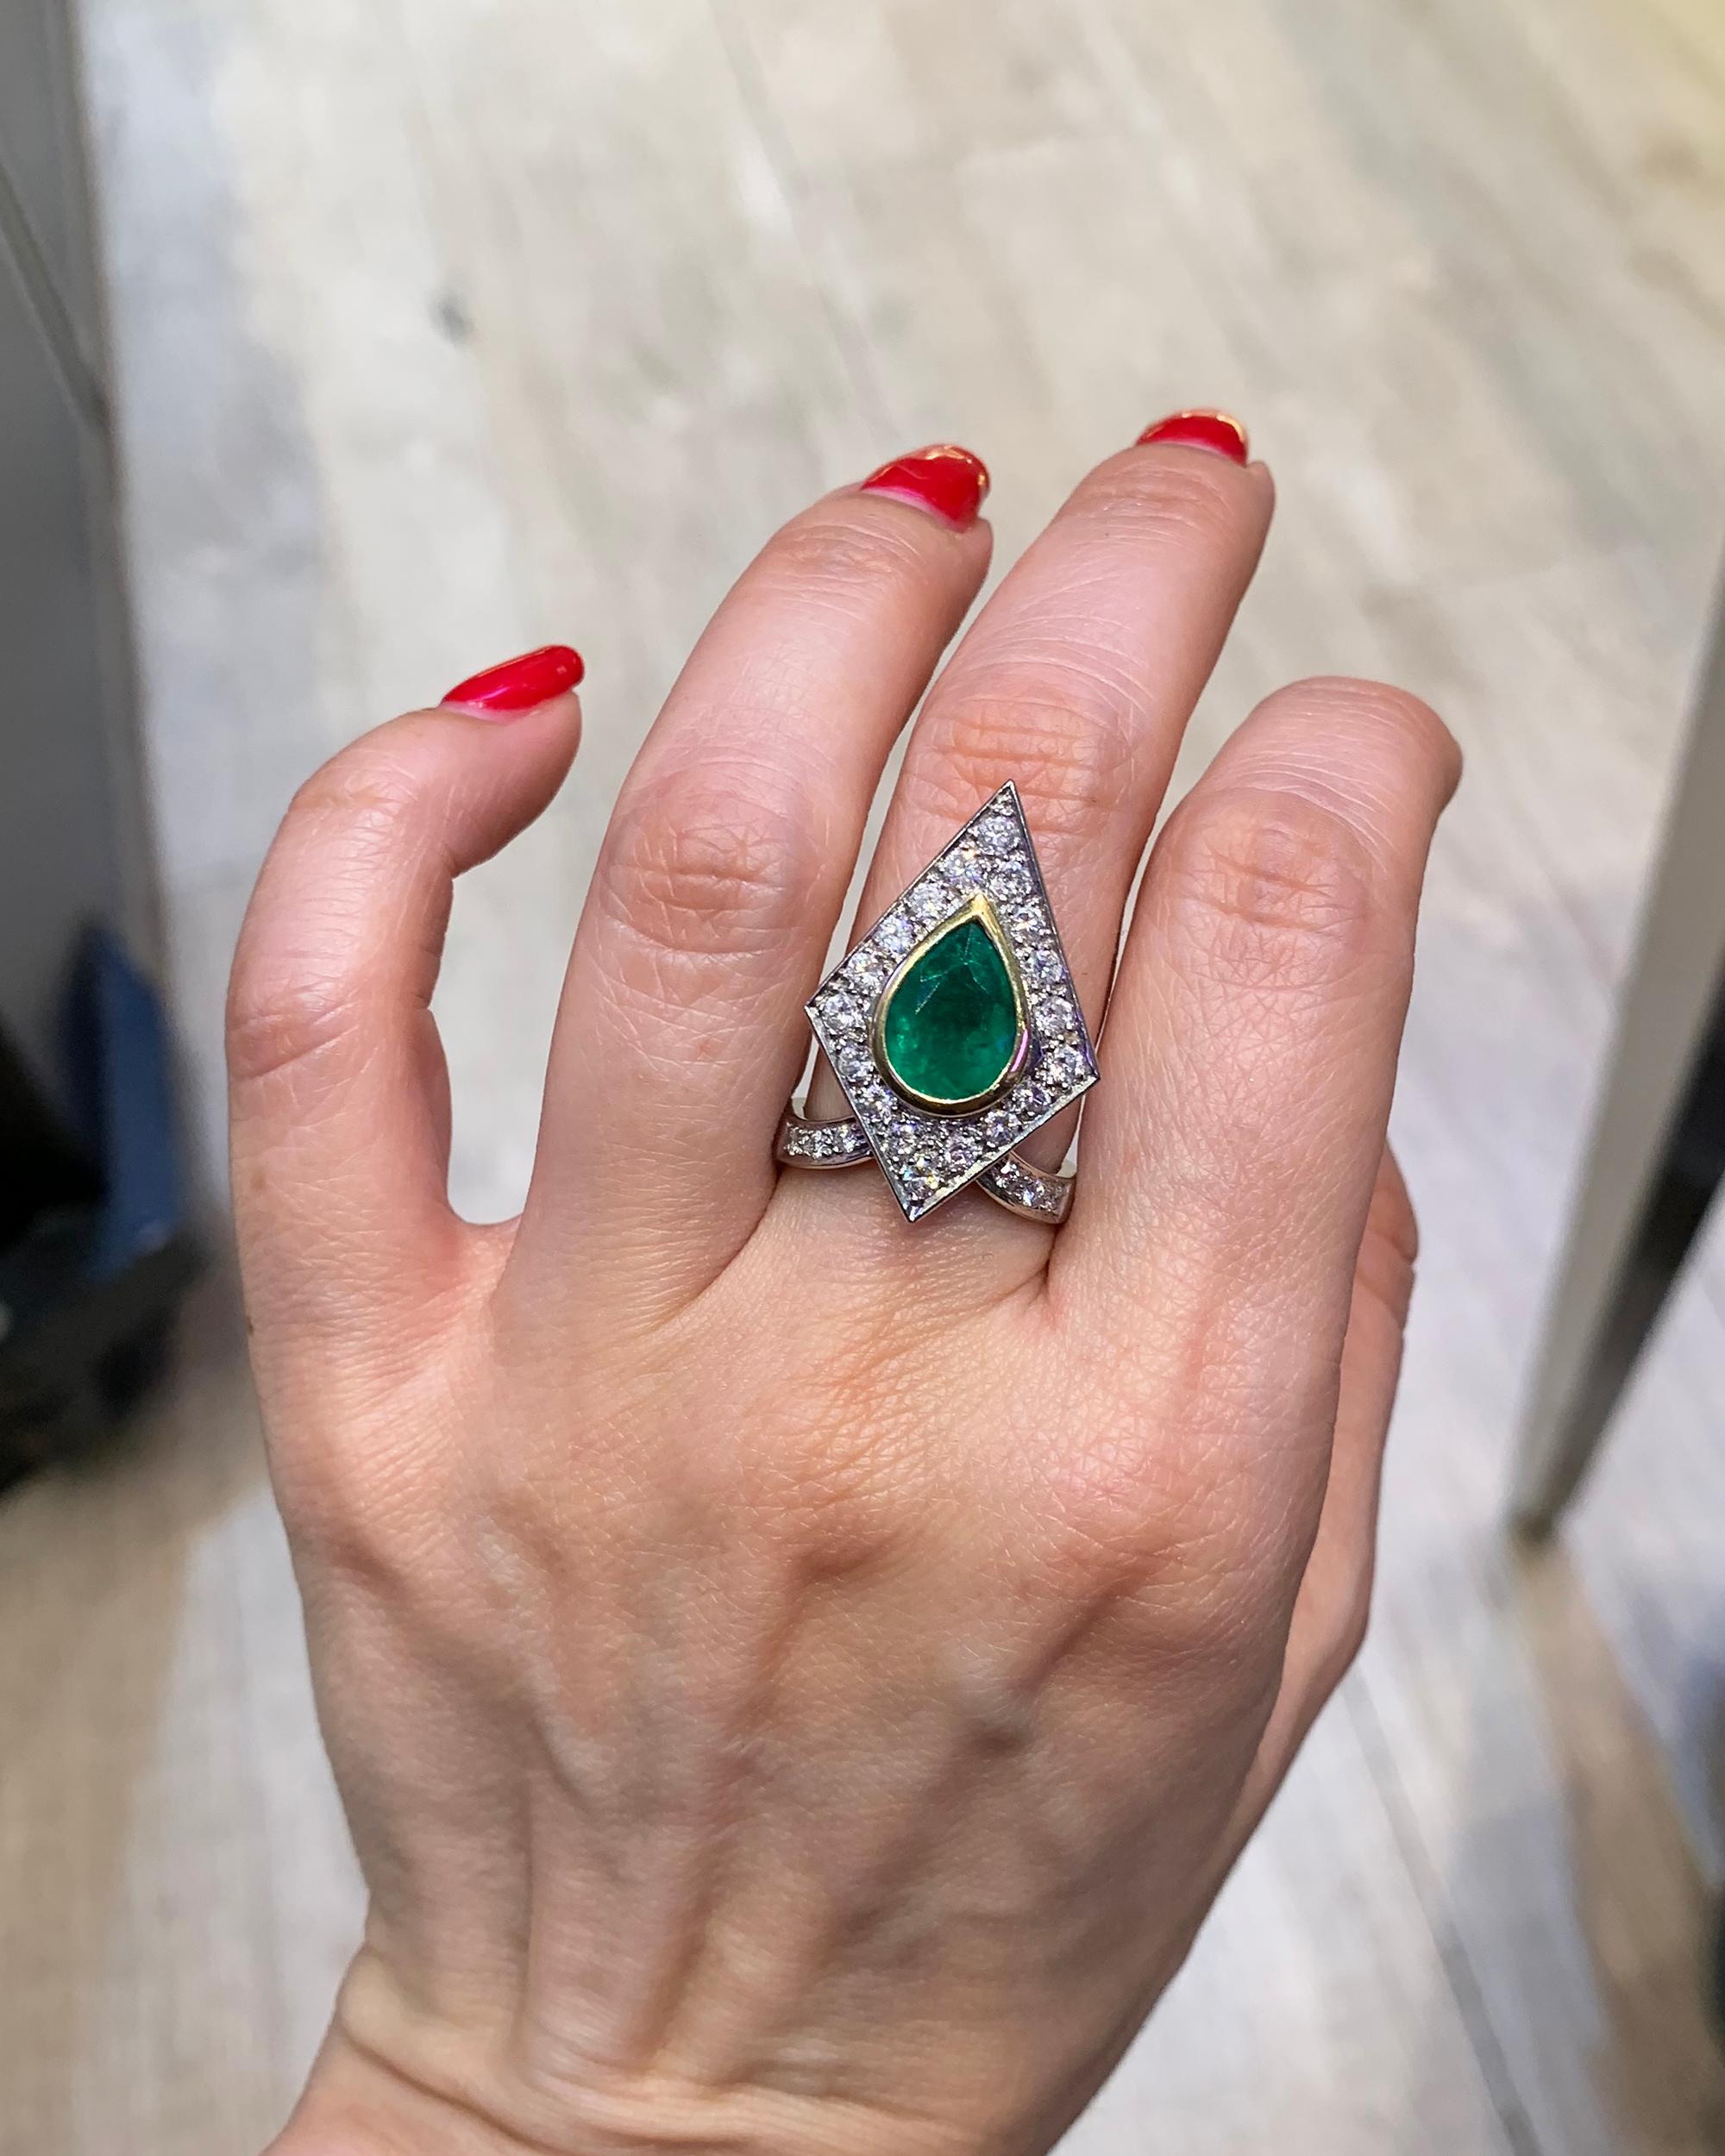 Made in the 21st century, circa 2010, this unusual emerald and diamond pyramid ring by Spectra Fine Jewelry is striking as a cocktail ring, engagement ring, or celebration ring. Crafted in platinum, the detailing of the ring is stunning, with a